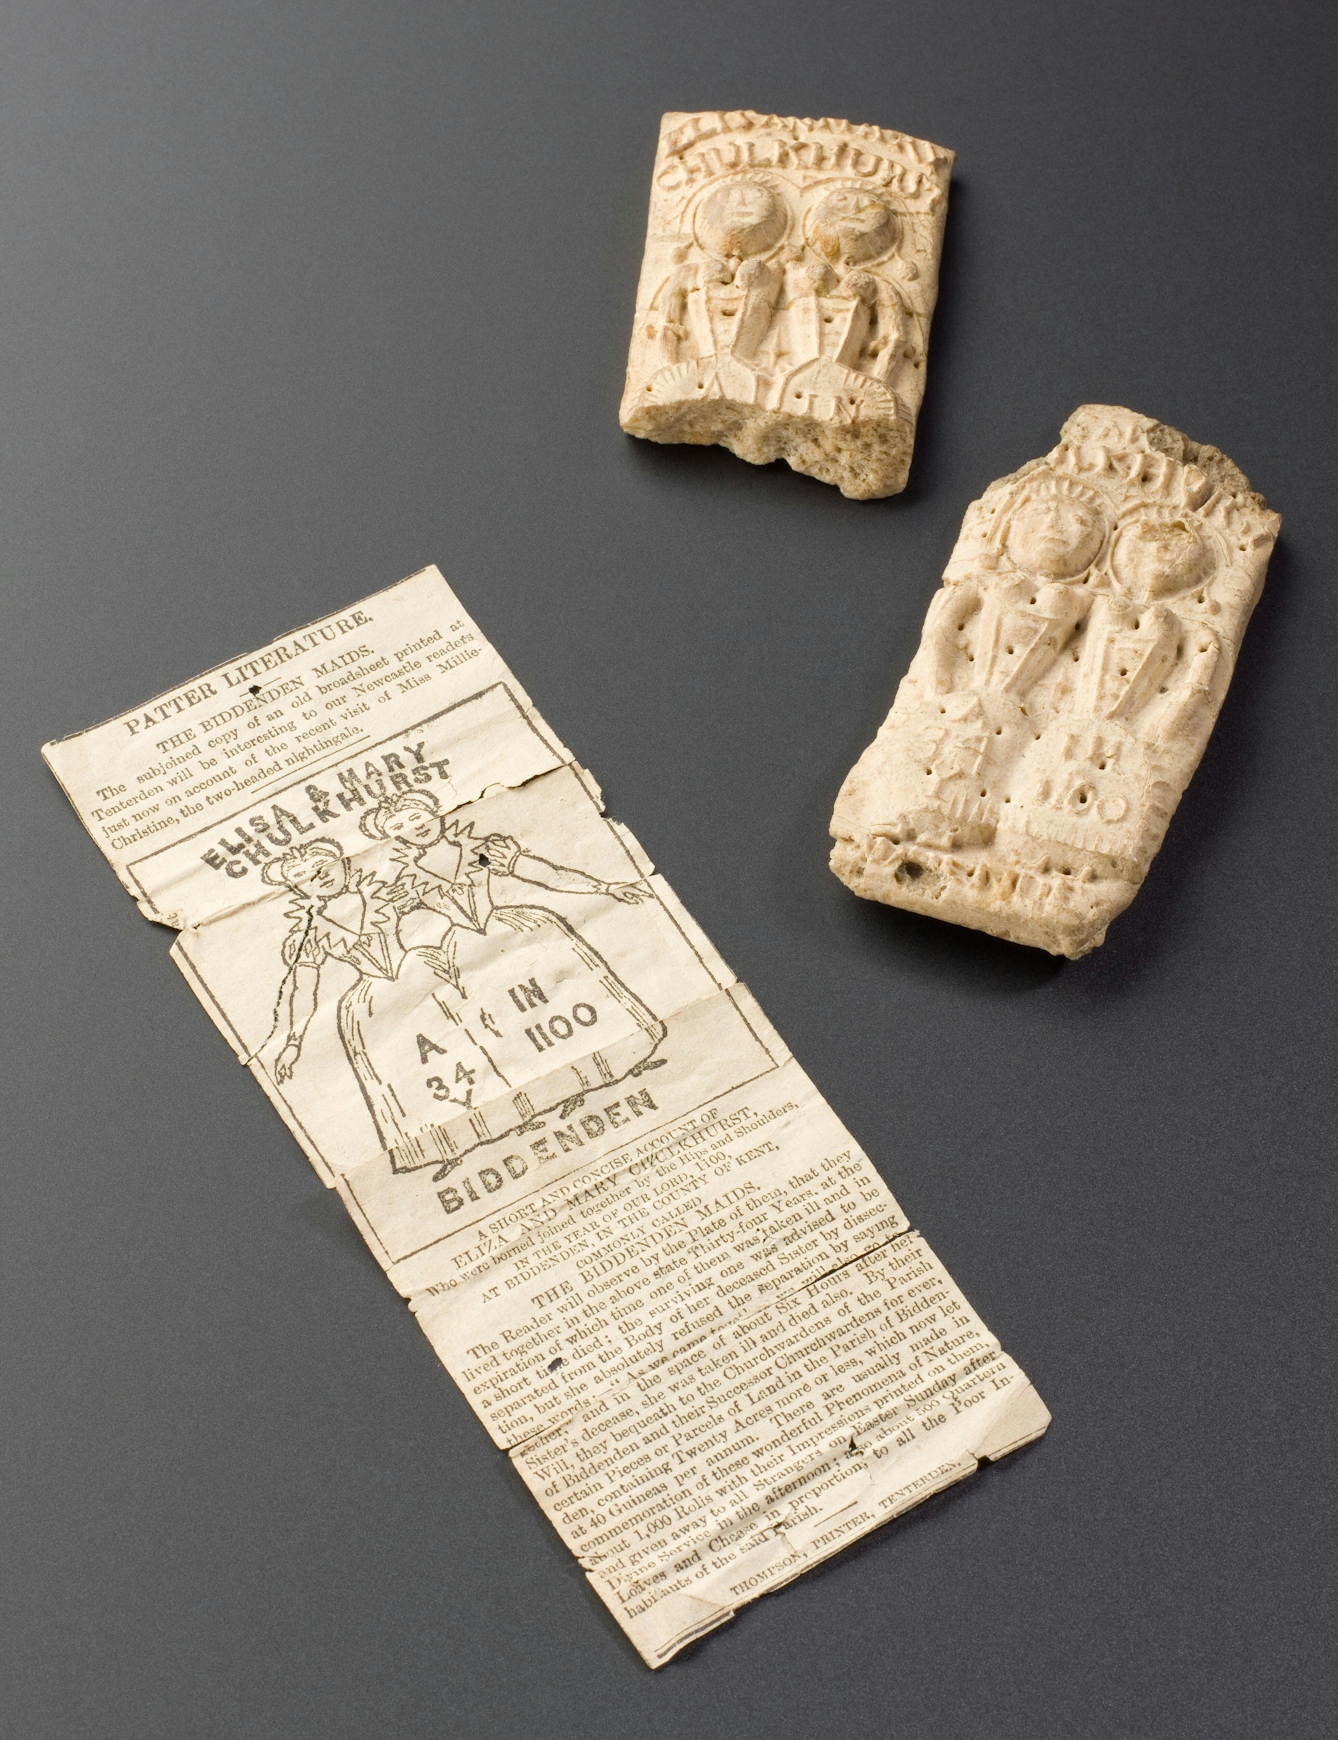 Photograph showing a pamphlet and two biscuits resting on a grey background. 

The pamphlet has an image of a pair of conjoined twins and text which reads 'Elisa and Mary Chulkhurst. Biddenden.' The rest of the text is illegible. The biscuits have the same image of the twins embossed onto them, one of the biscuits has been broken.